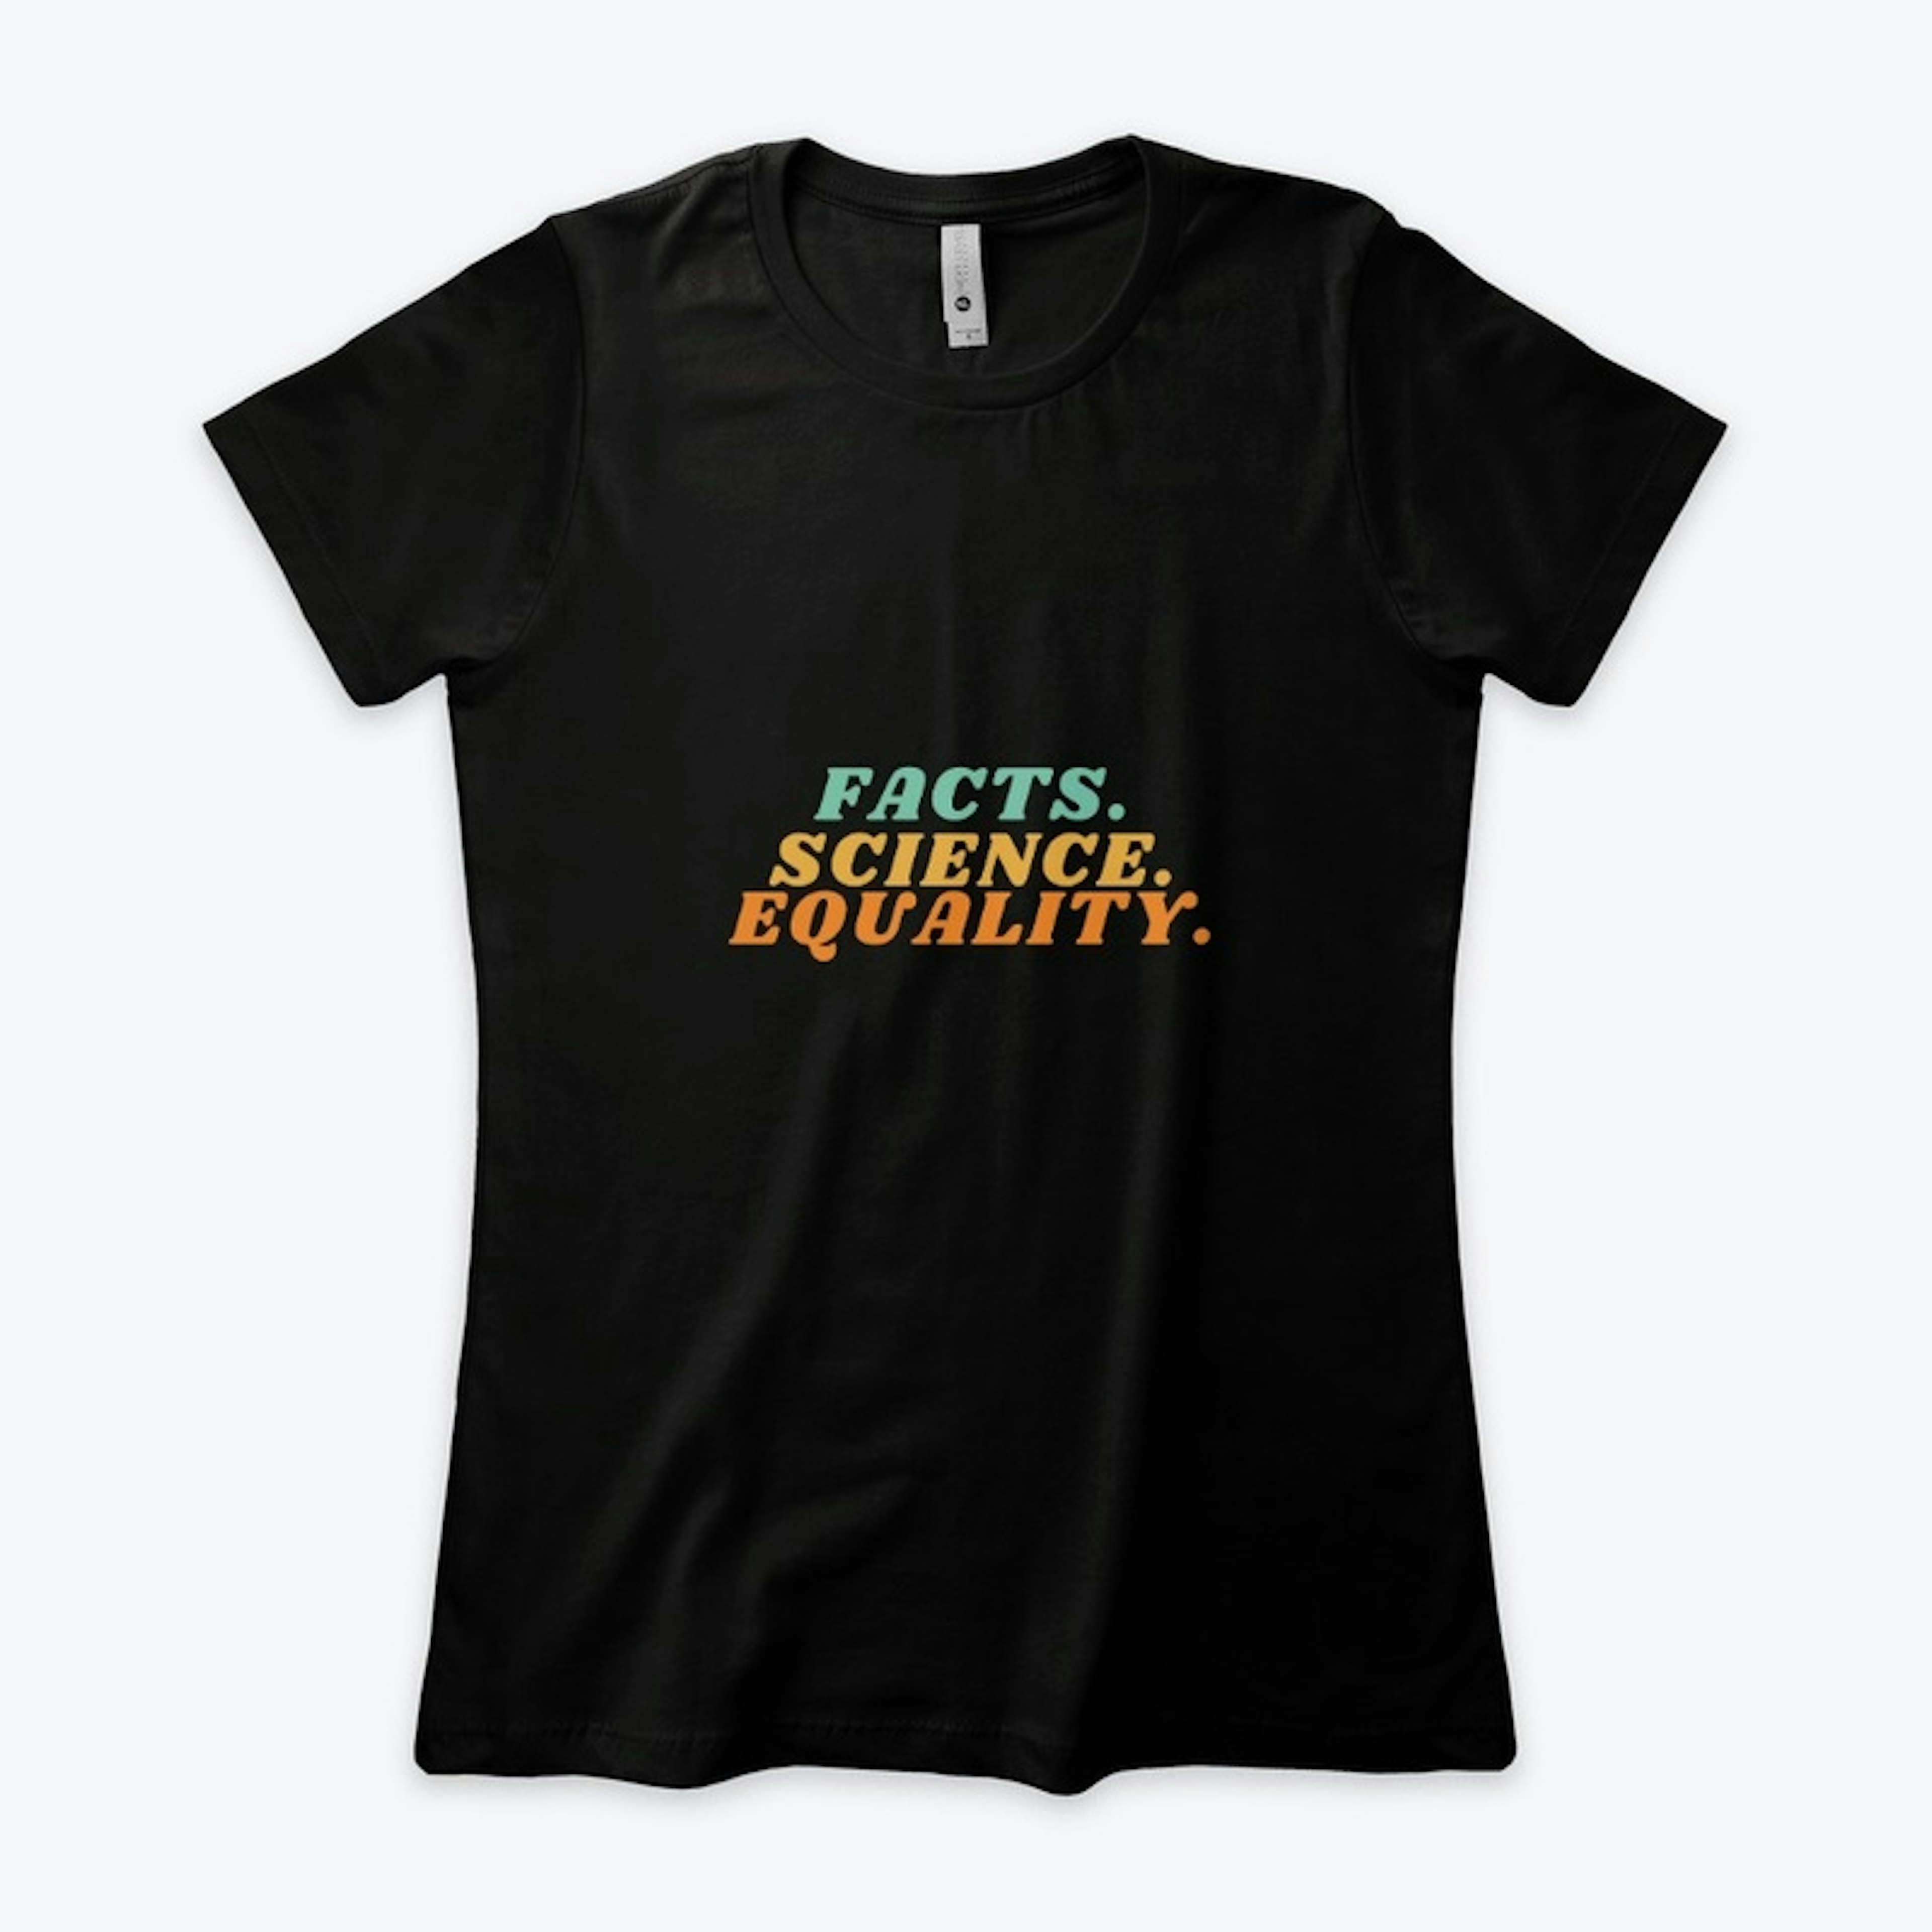 Facts, Science and Equality Collection